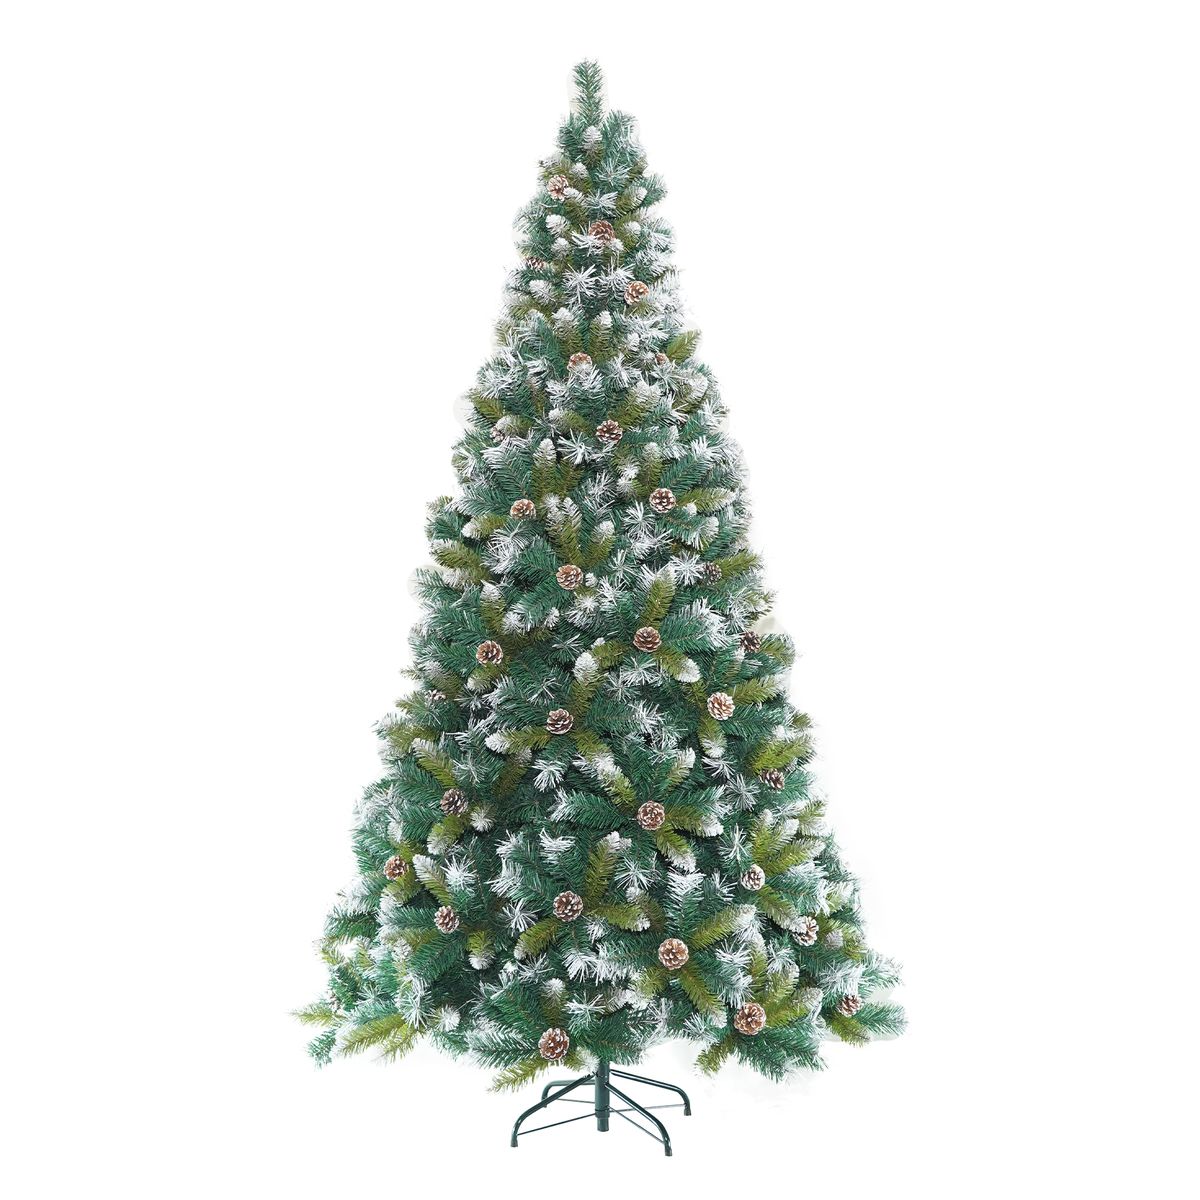 Martha Stewart 3m Frosted Cedar Christmas Tree with Pinecones